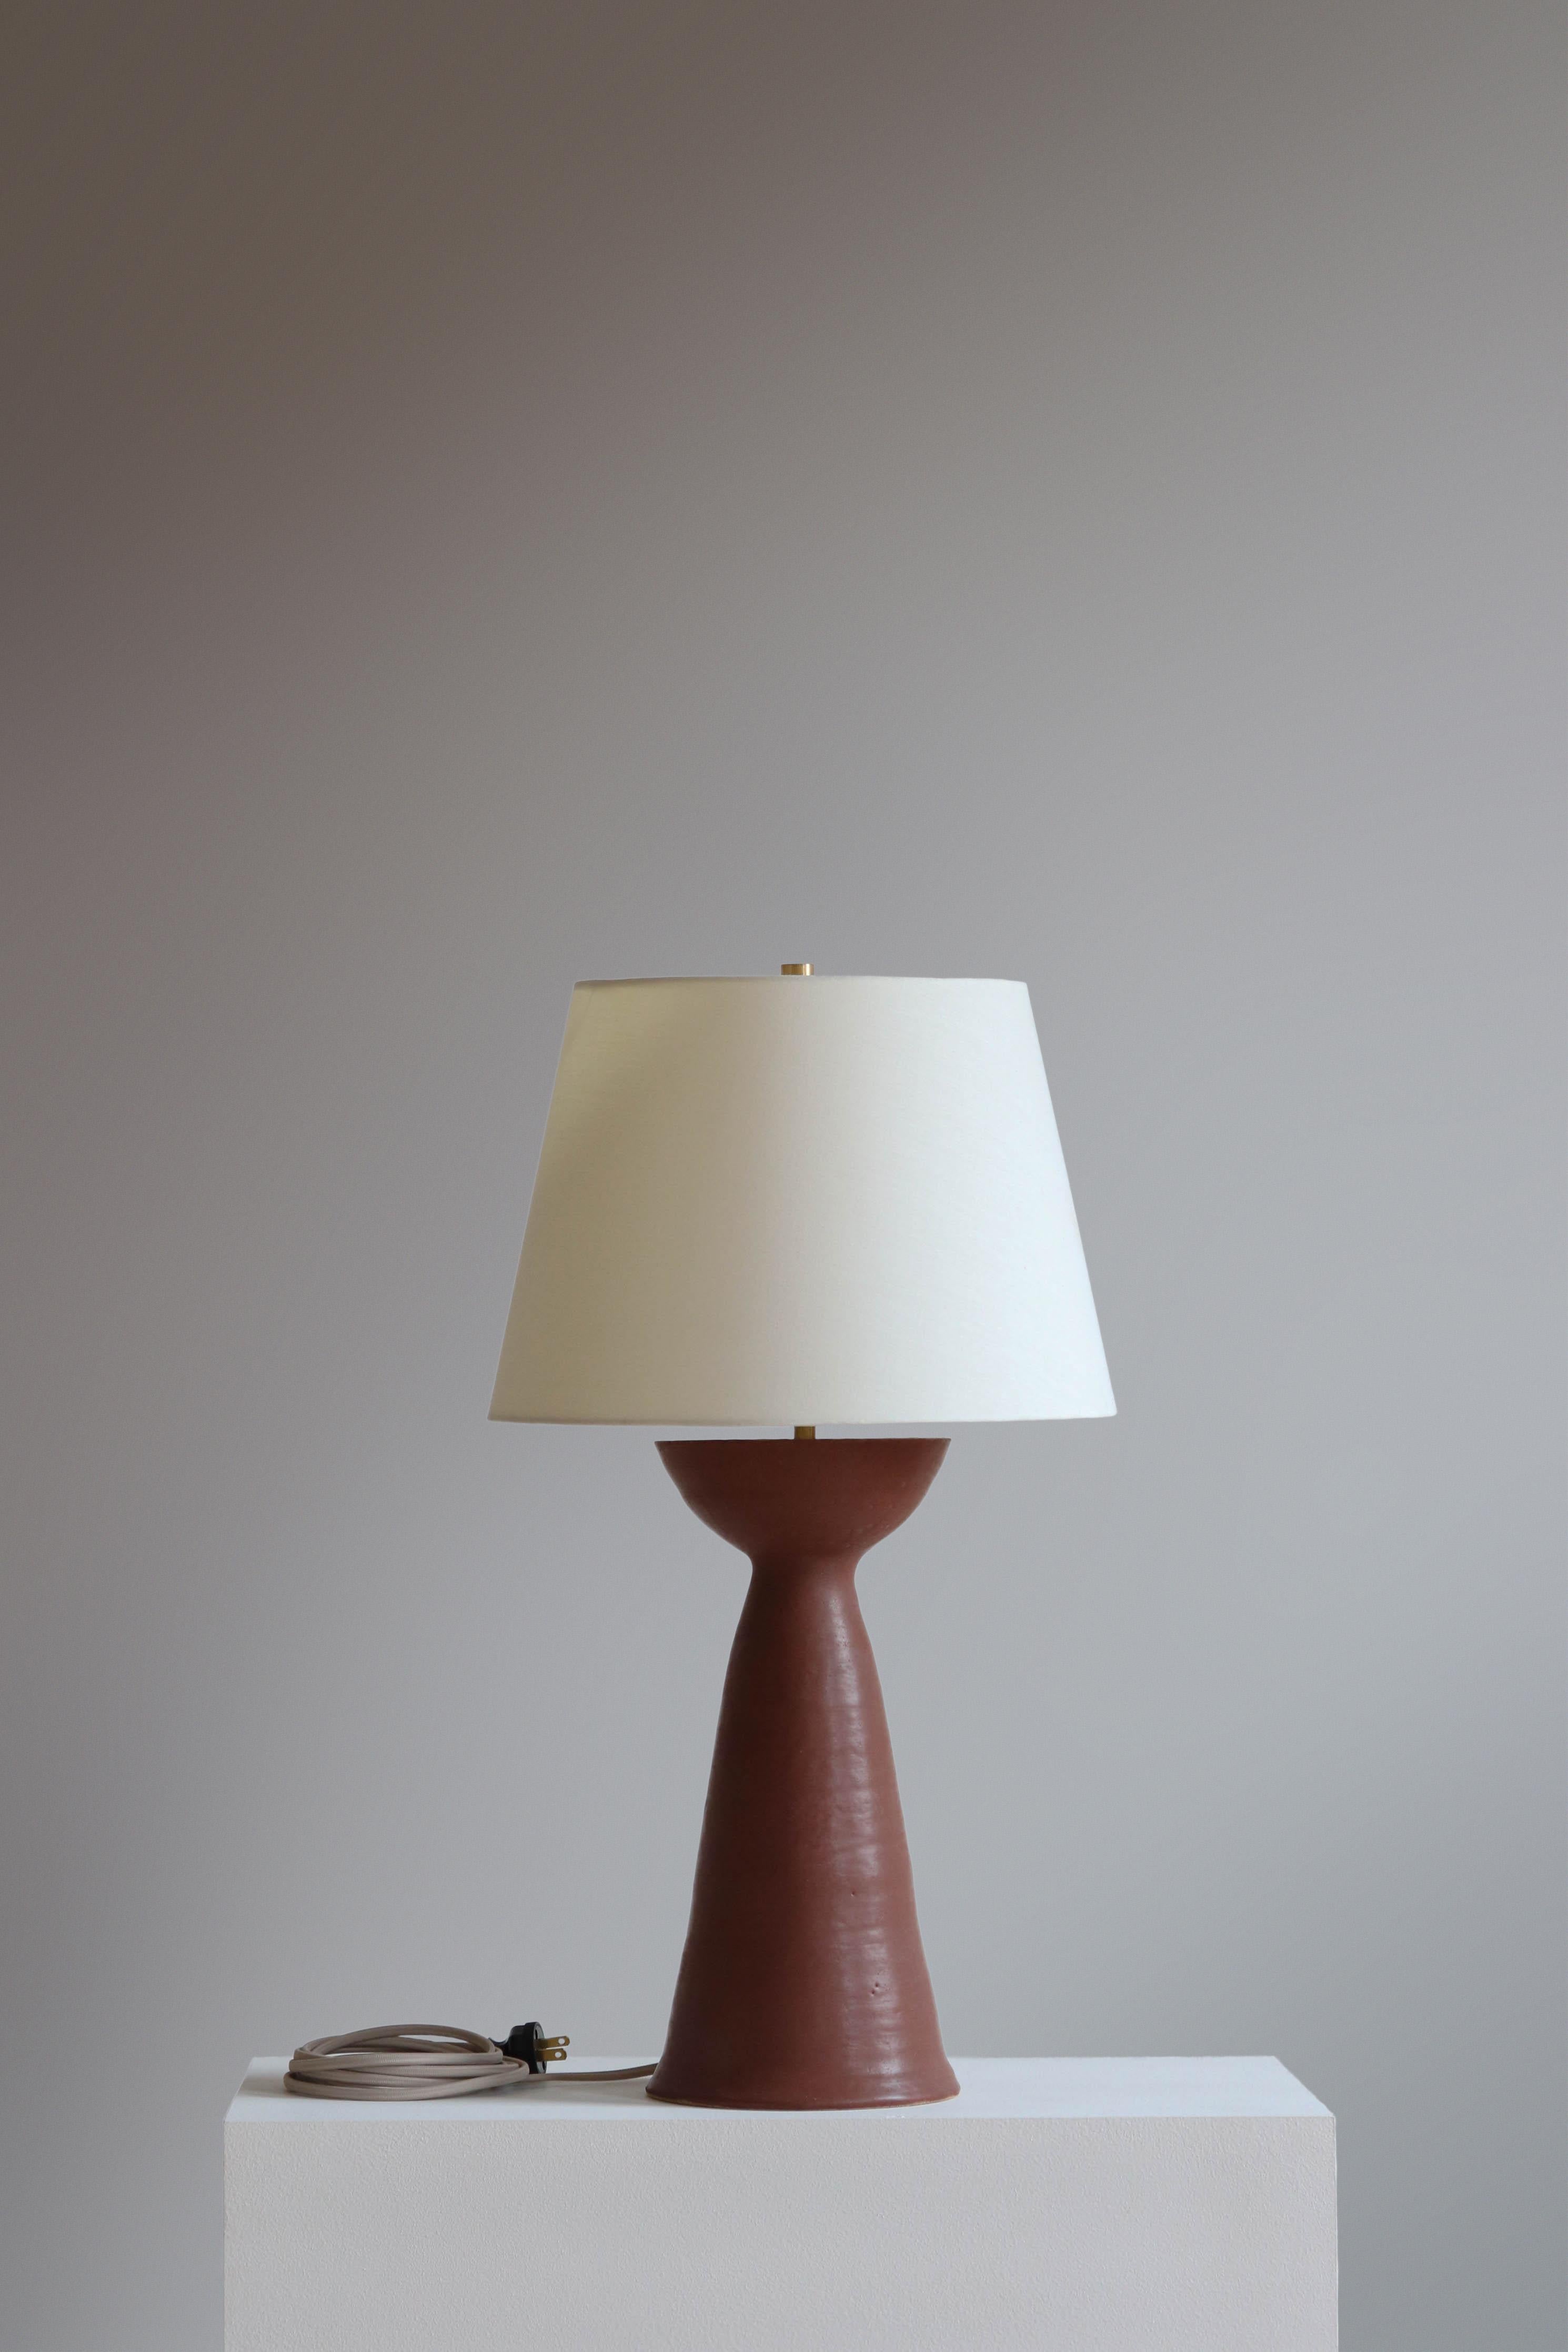 Anthracite Seneca 24 Table Lamp by Danny Kaplan Studio
Dimensions: ⌀ 36 x H 61 cm
Materials: Glazed Ceramic, Unfinished Brass, Linen

This item is handmade, and may exhibit variability within the same piece. We do our best to maintain a consistent